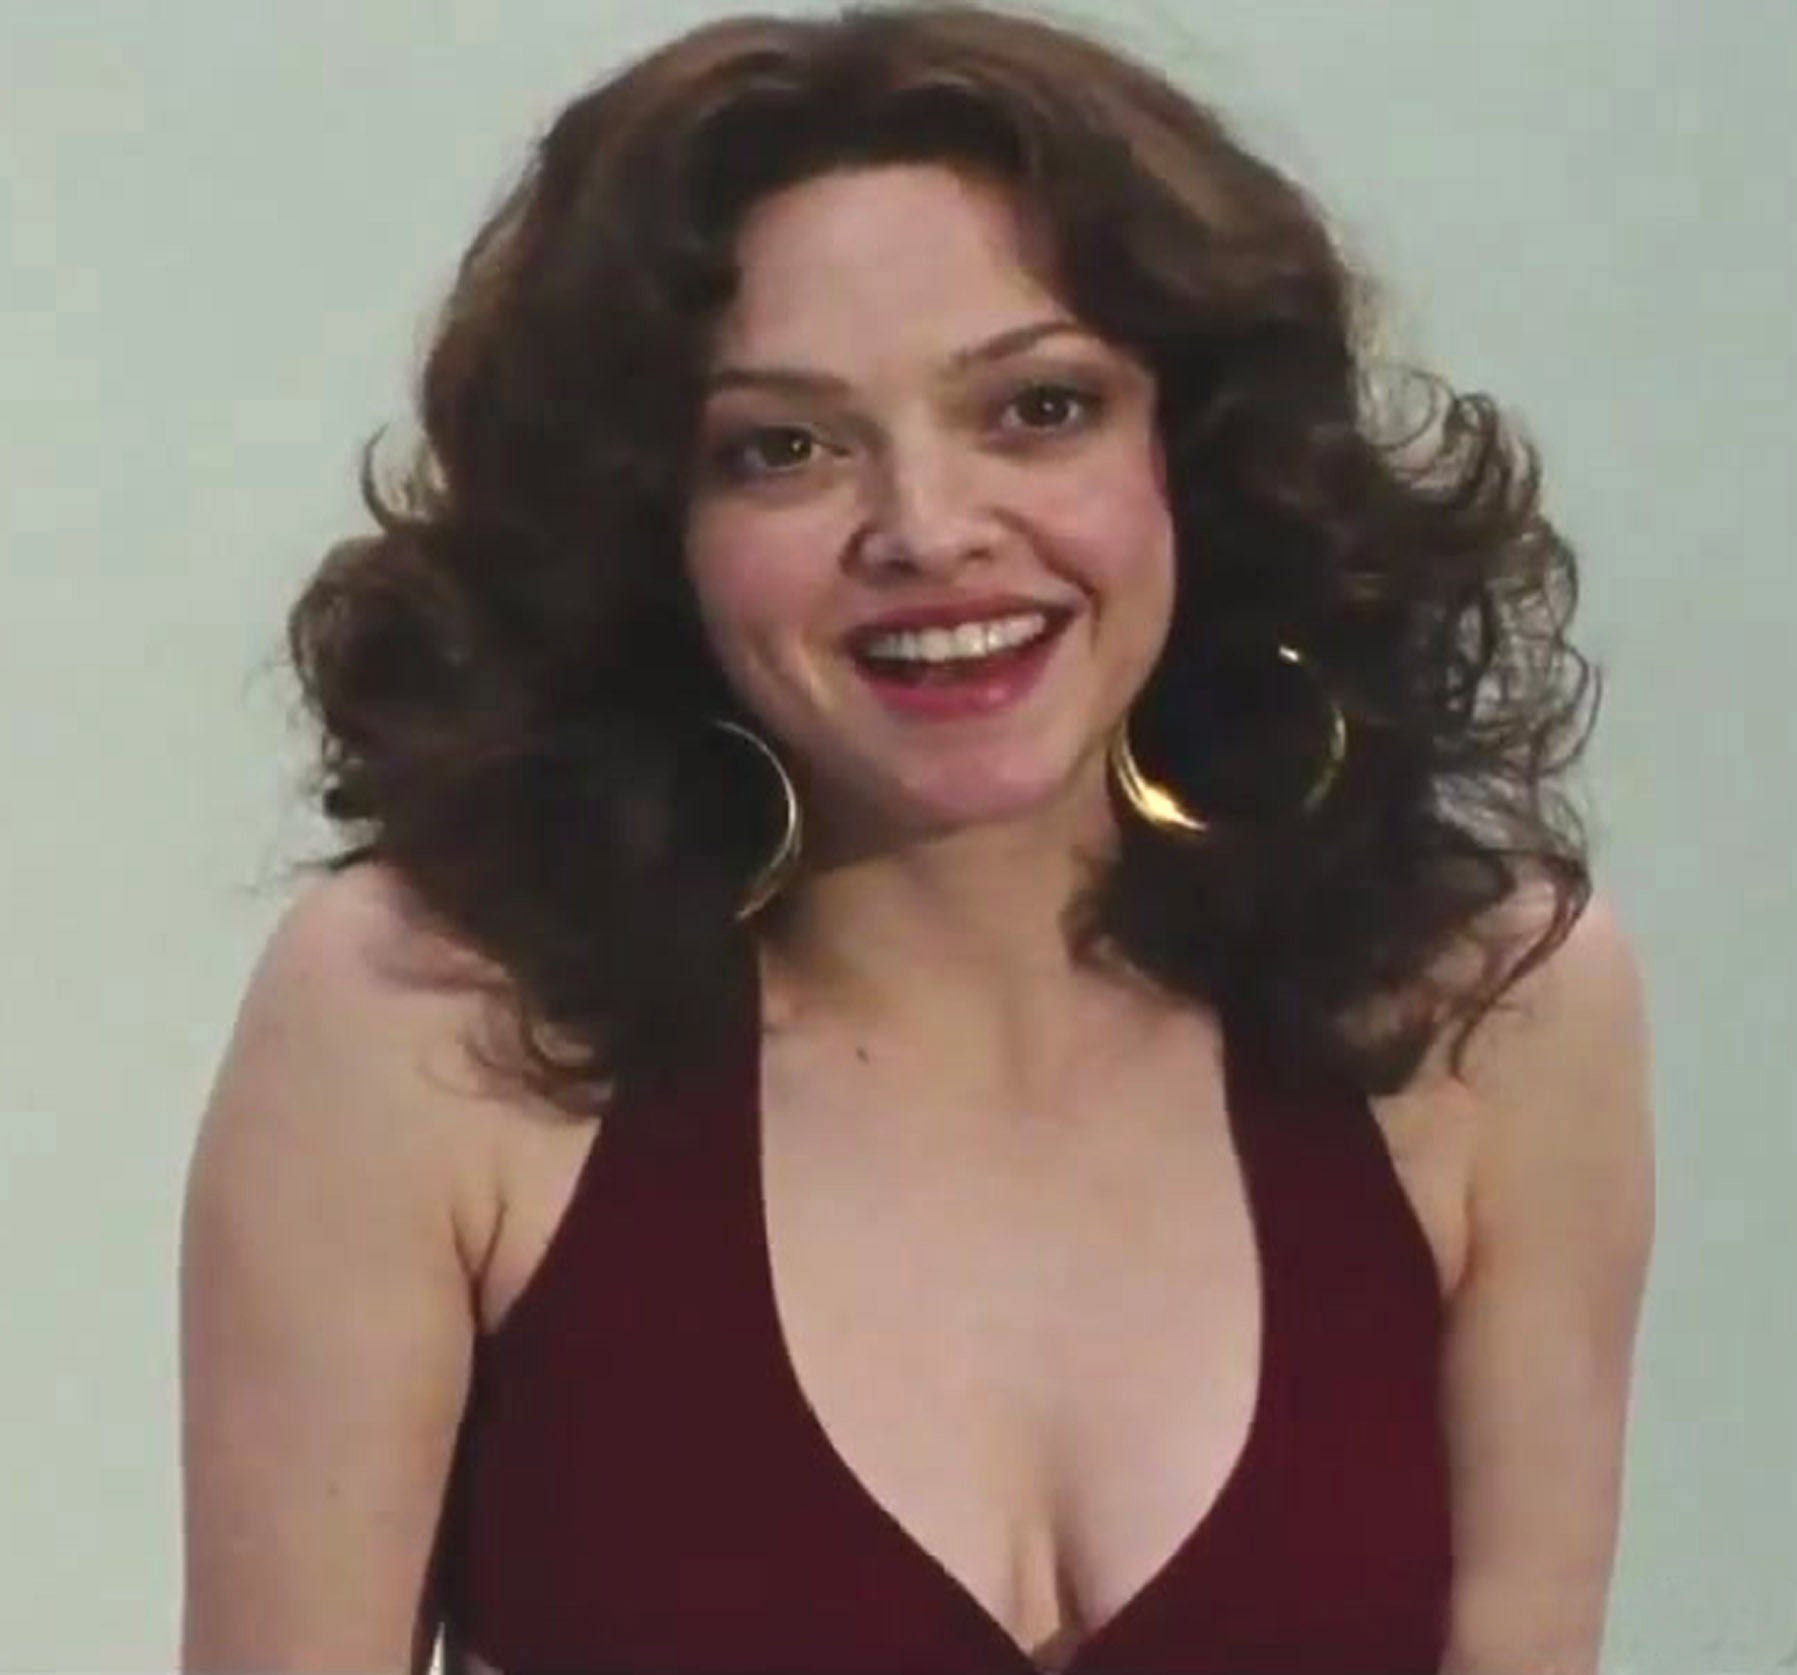 Amanda Seyfried Porn Star - Berlin Film Festival review: Lovelace starring Amanda Seyfried as the  troubled Deep Throat star | The Independent | The Independent